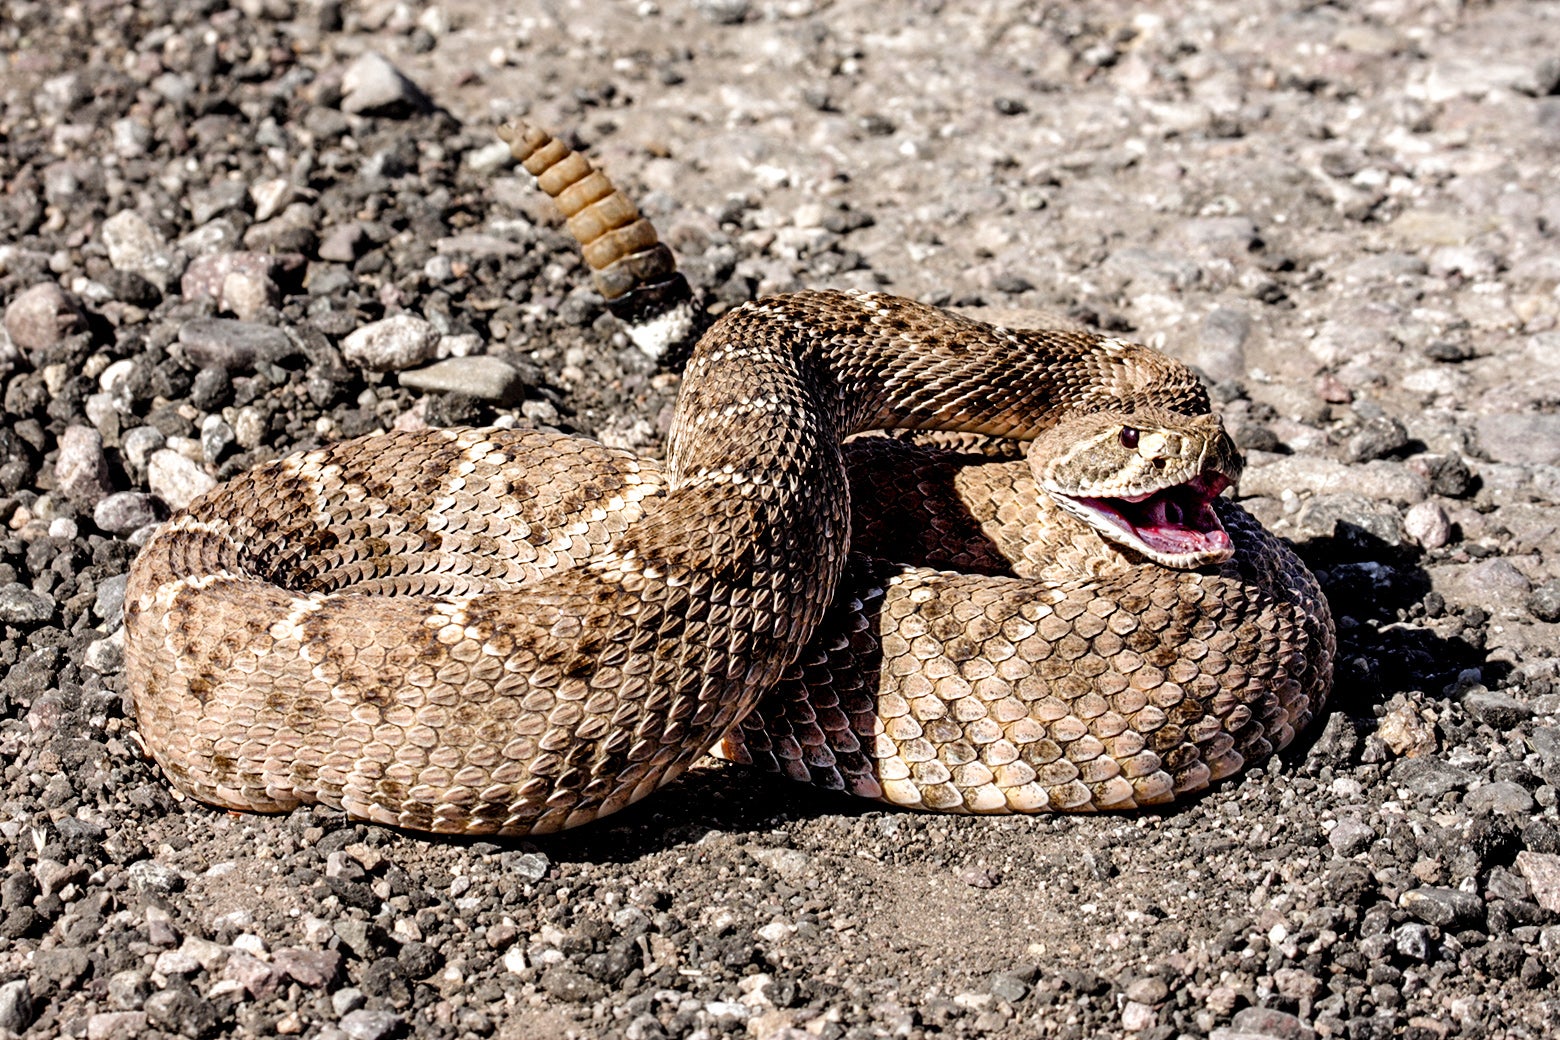 Snakebites May Be On the Rise. Here’s What to Do if You Get One.